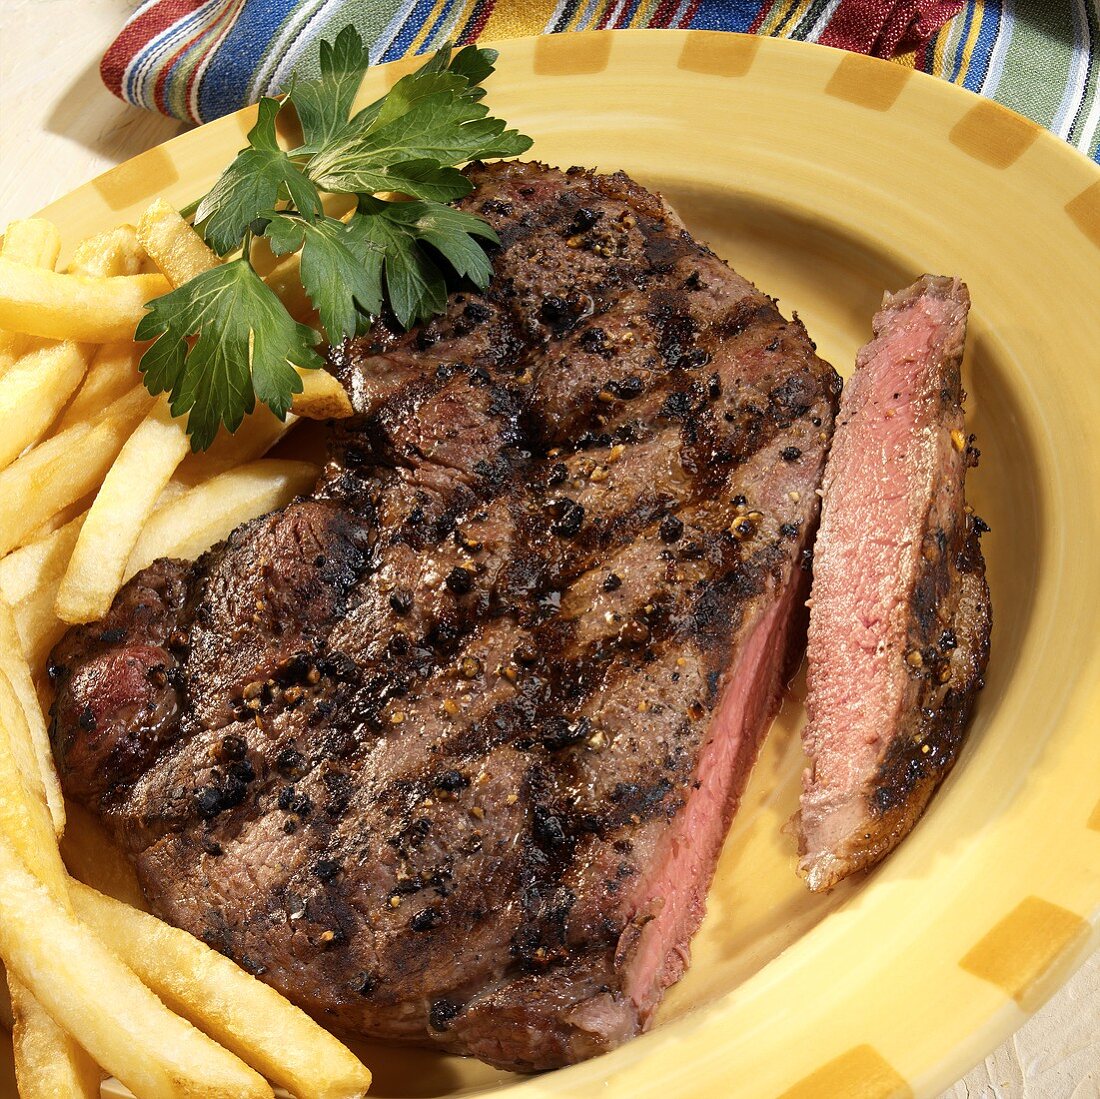 Grilled peppered steak with chips